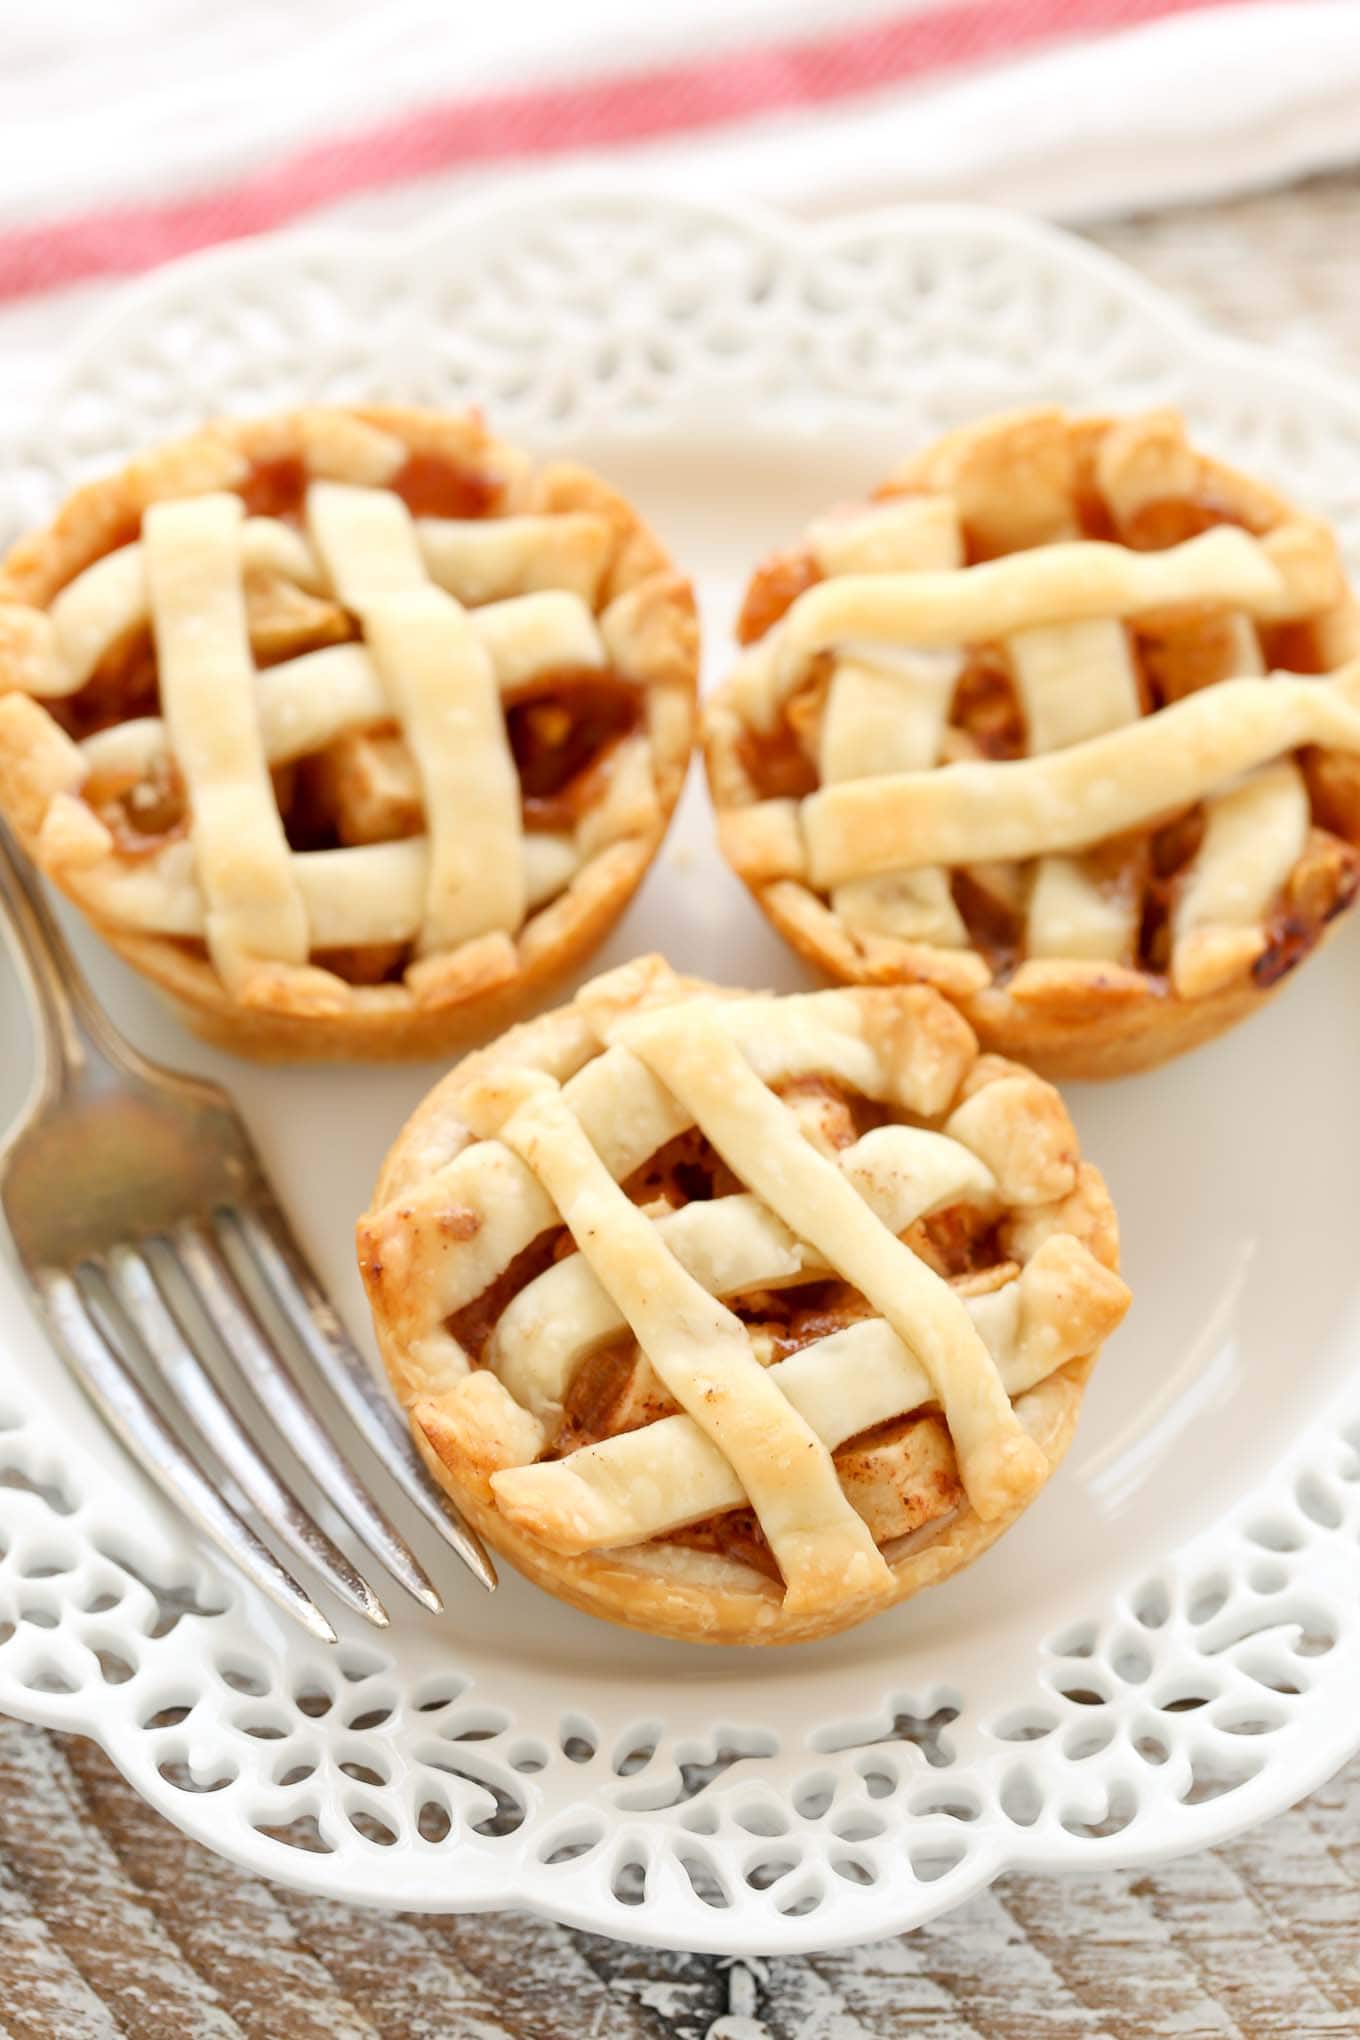 A close up view of three mini apple pies on a white plate.